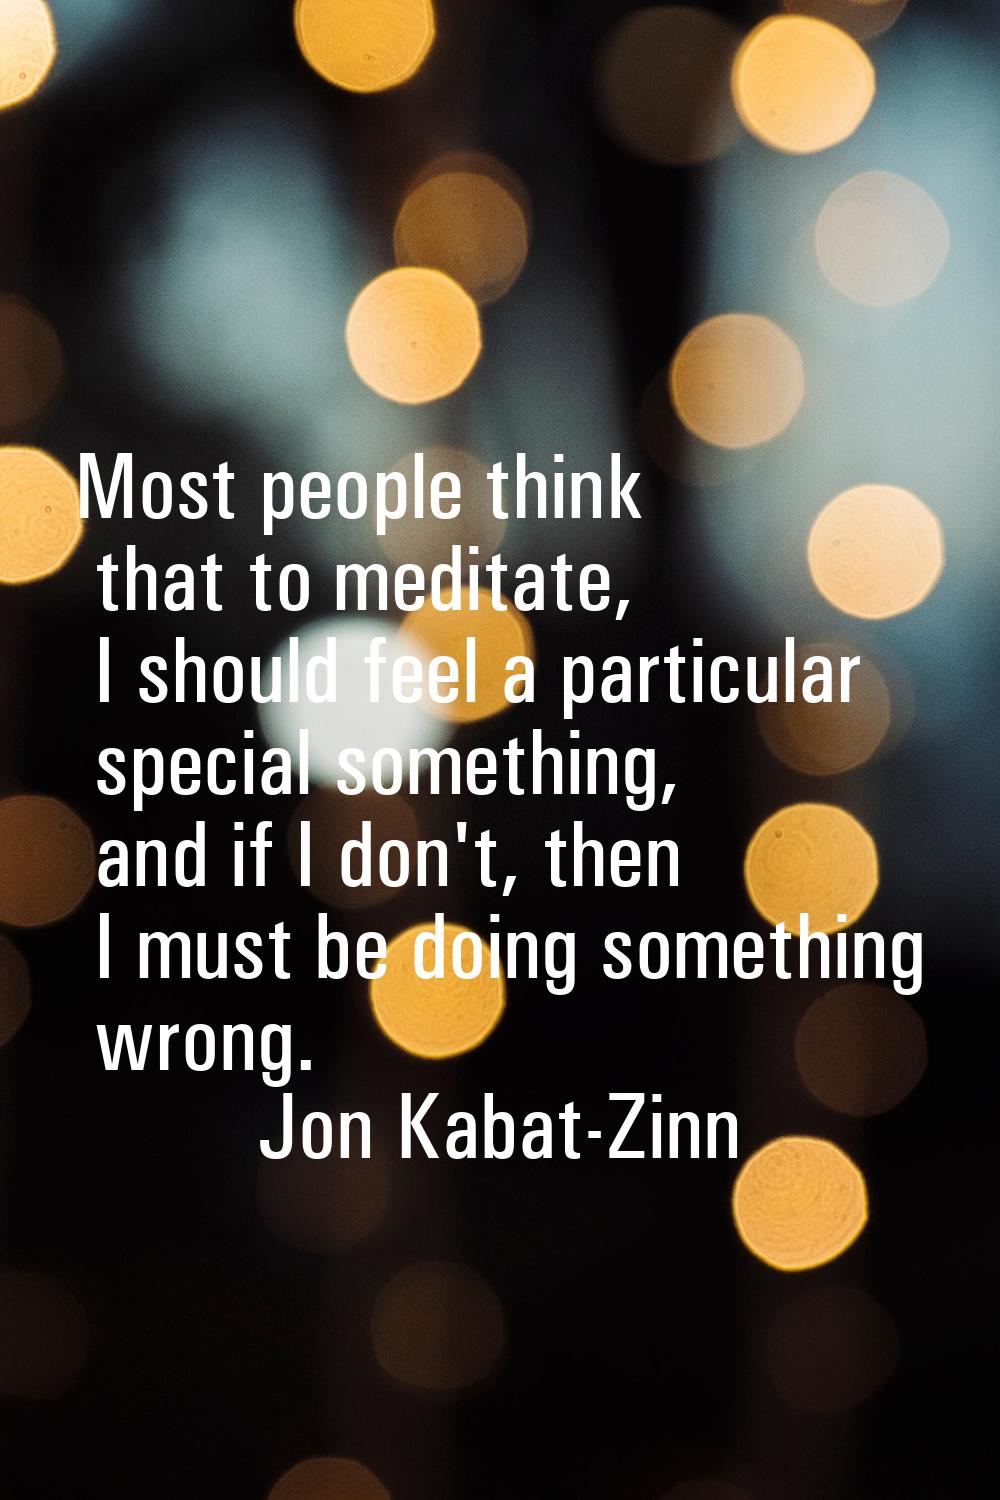 Most people think that to meditate, I should feel a particular special something, and if I don't, t